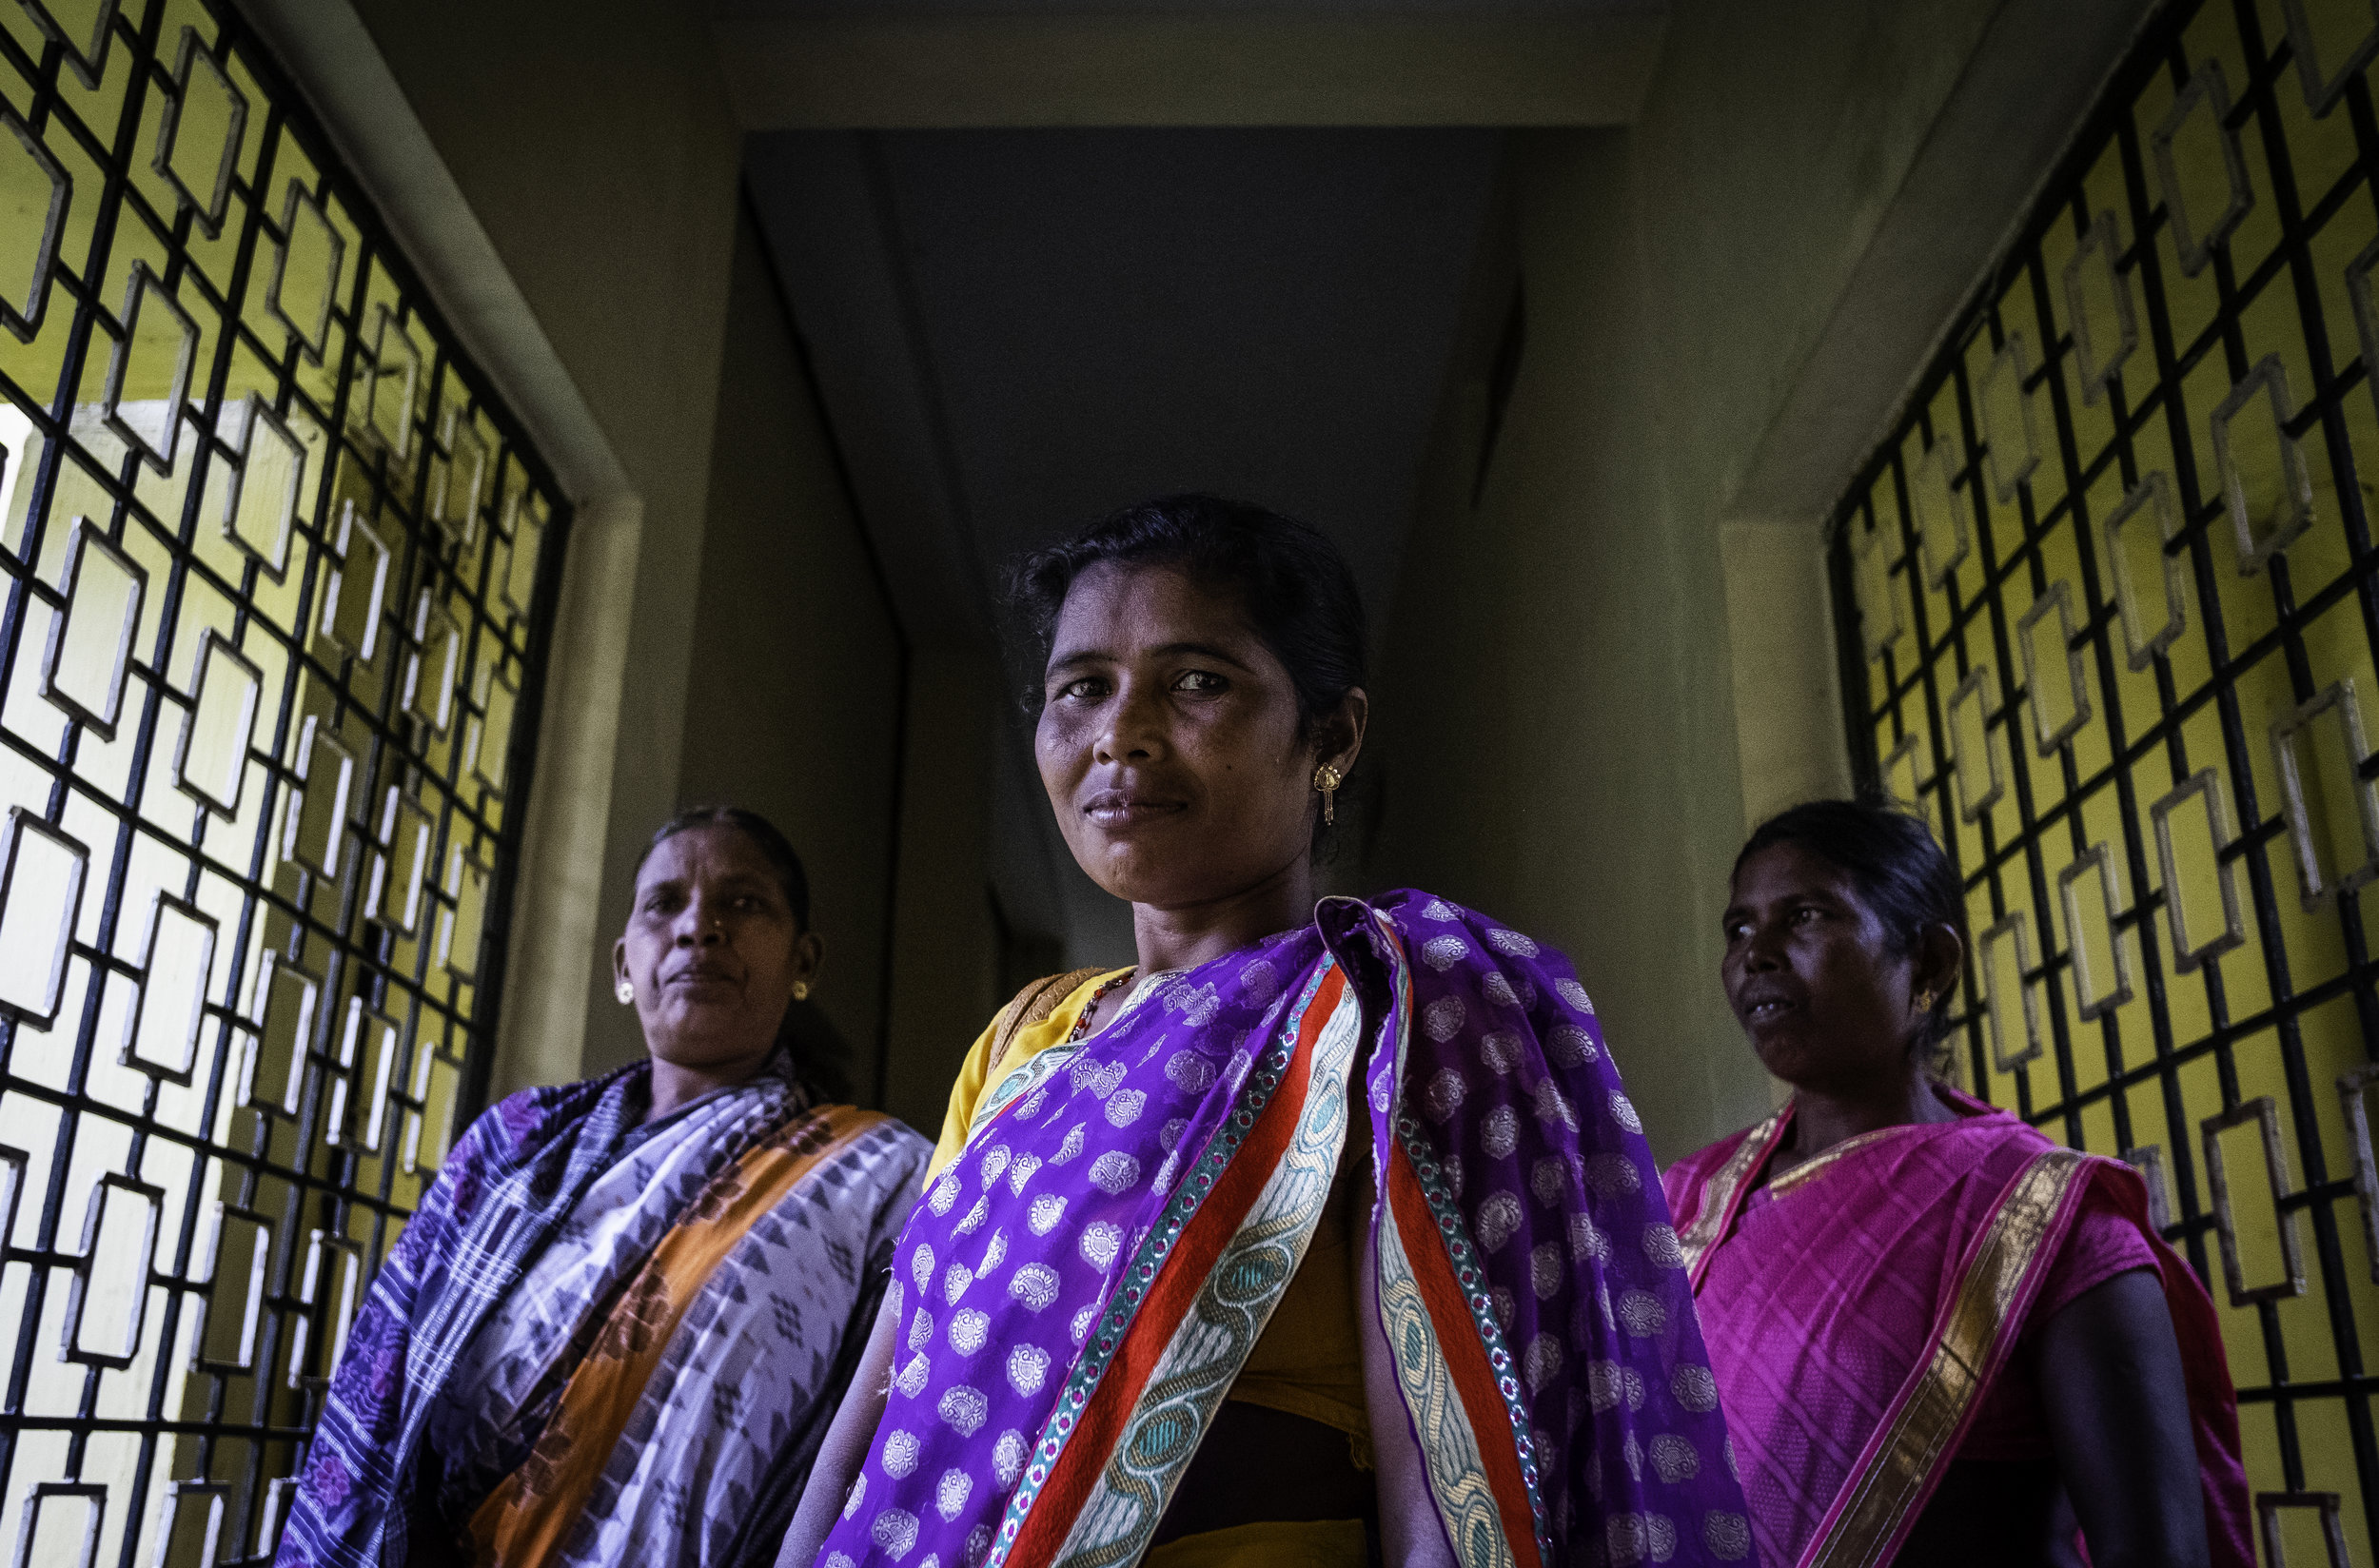   A group of Christian widows whose husbands were murdered for their faith during the Summer of 2008, meet together often in Kandhamal, India. Together they mourn, pray, and encourage each other to move forward in their relationships with Jesus Chris